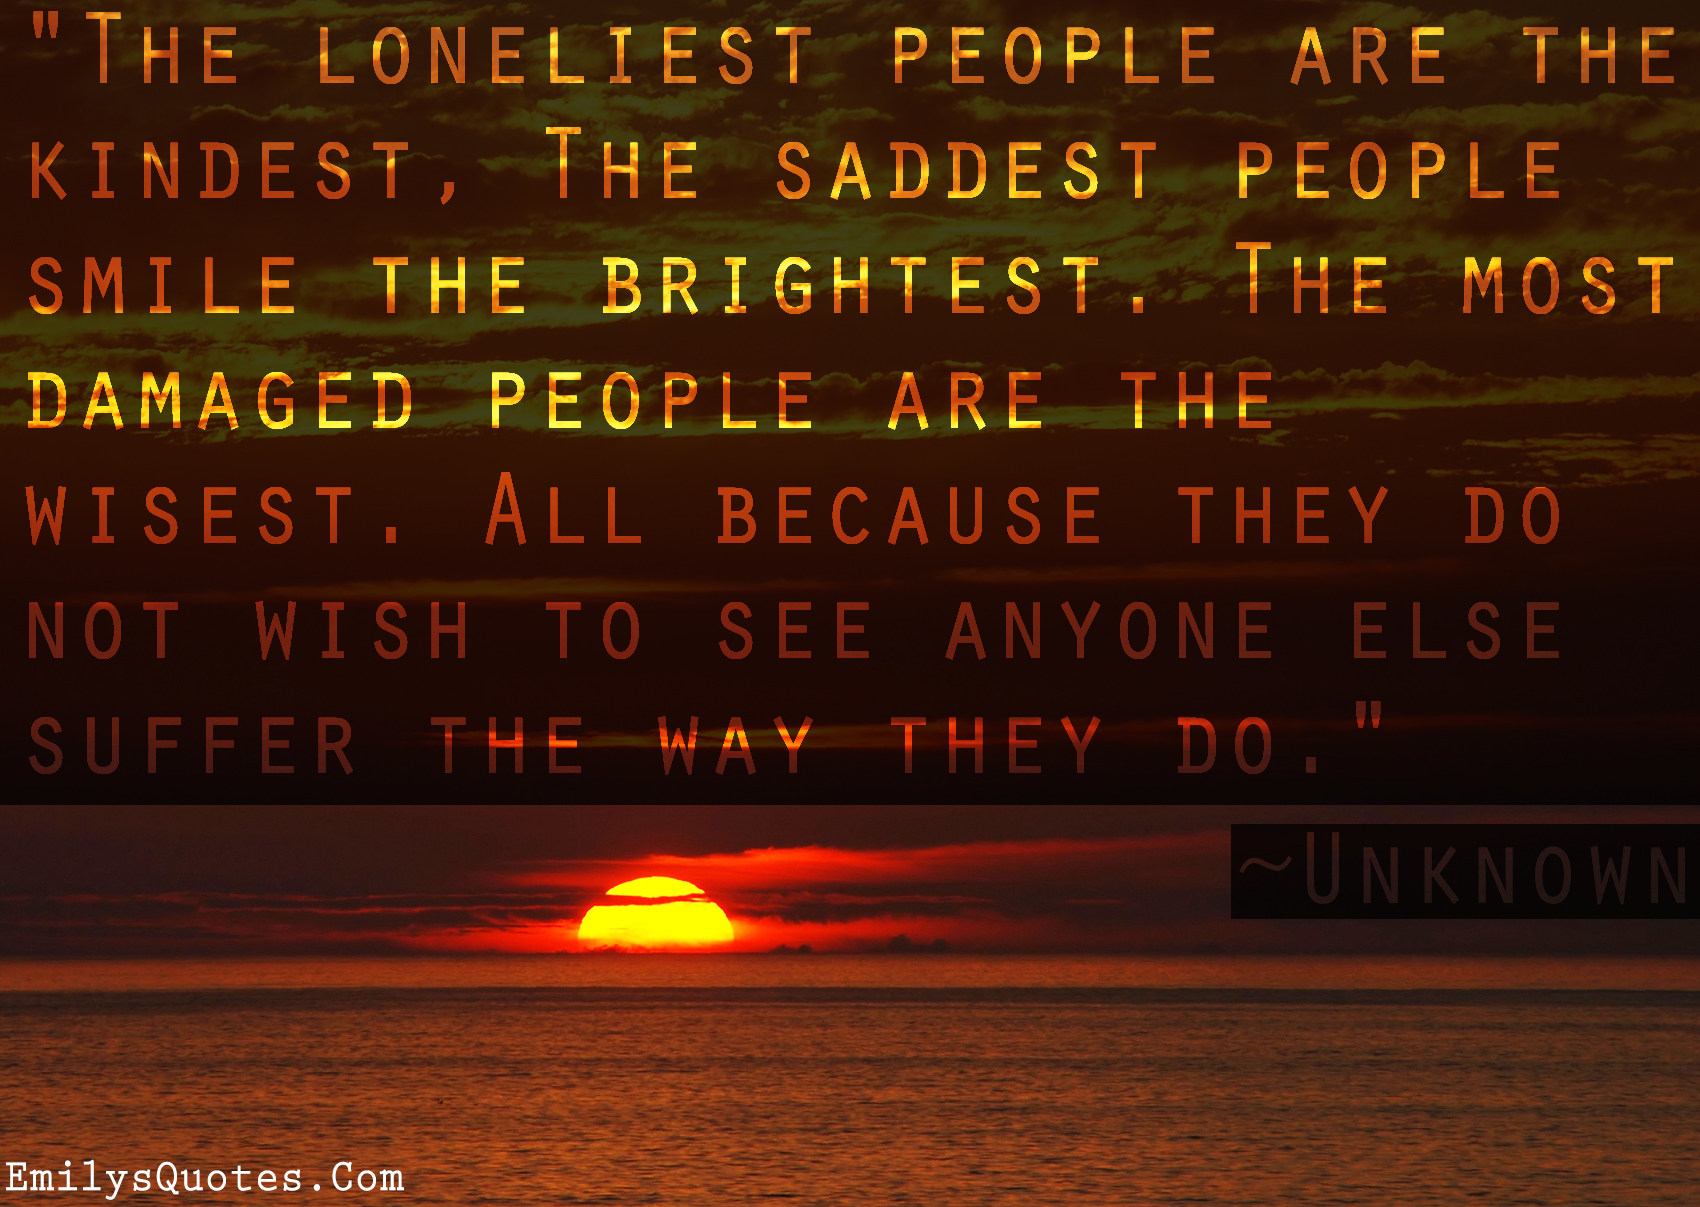 The loneliest people are the kindest, The saddest people smile the